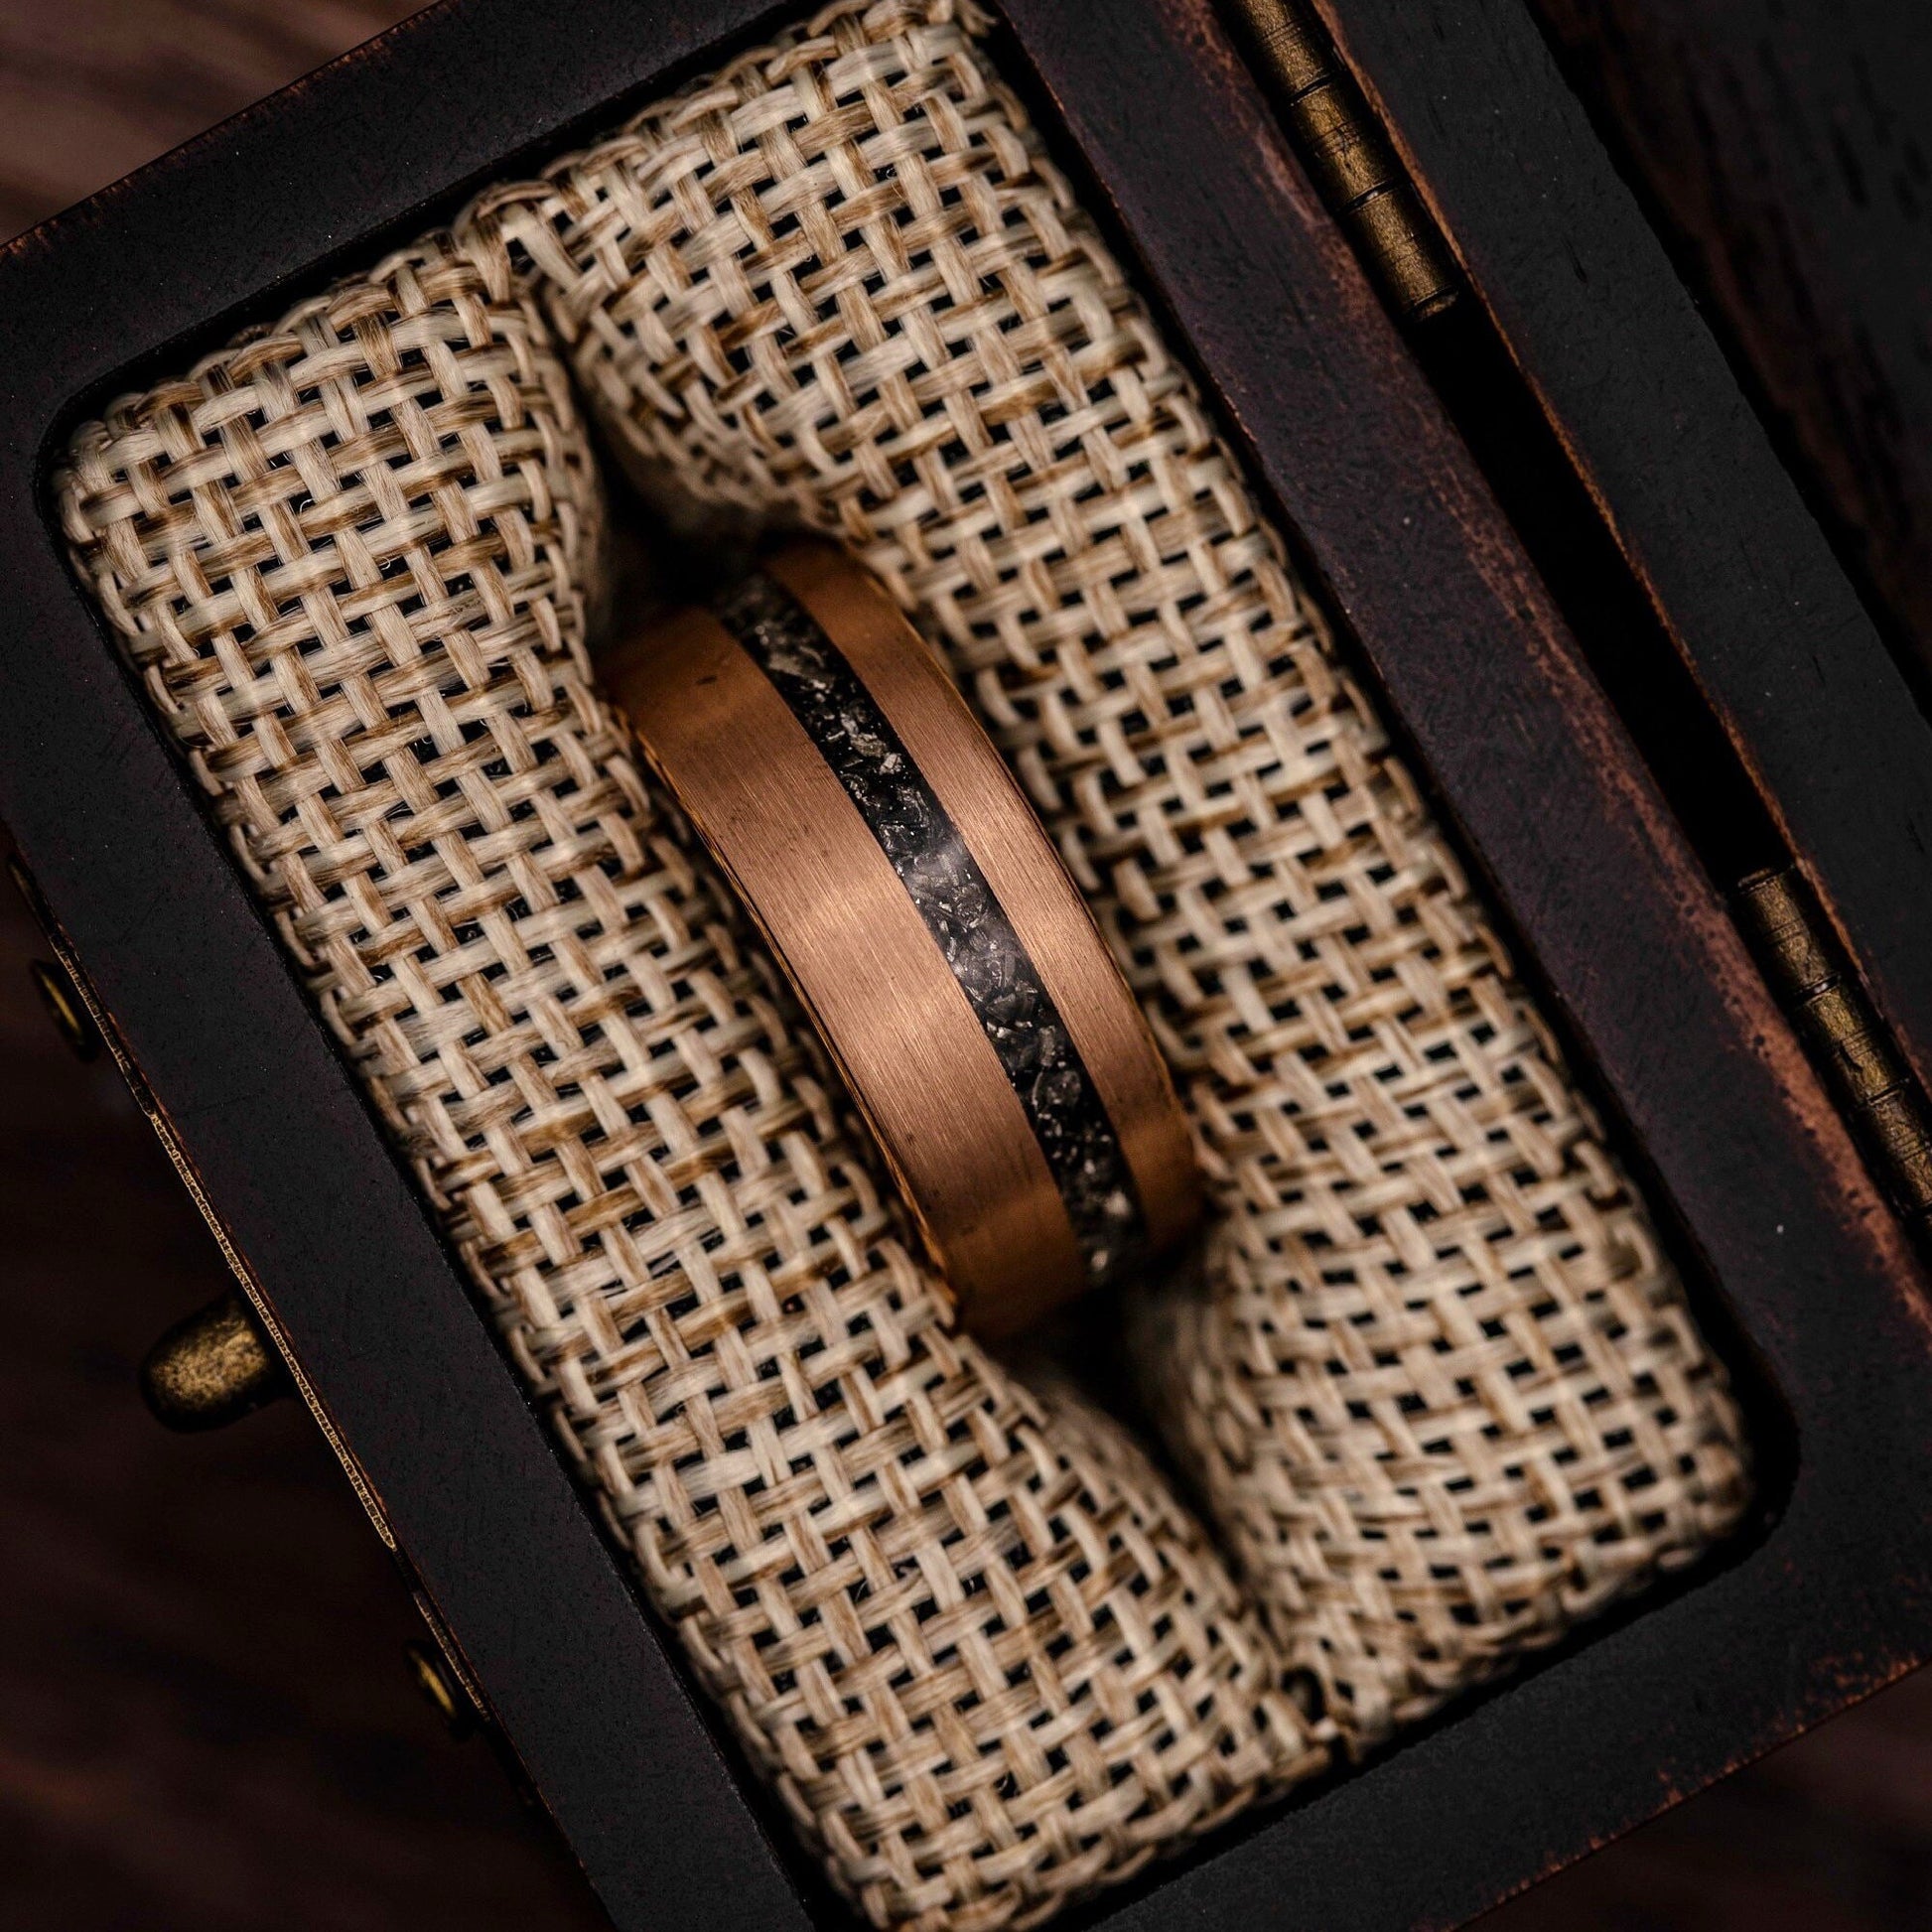 Rose gold and meteorite wedding bands, a perfect symbol of unity for couples.